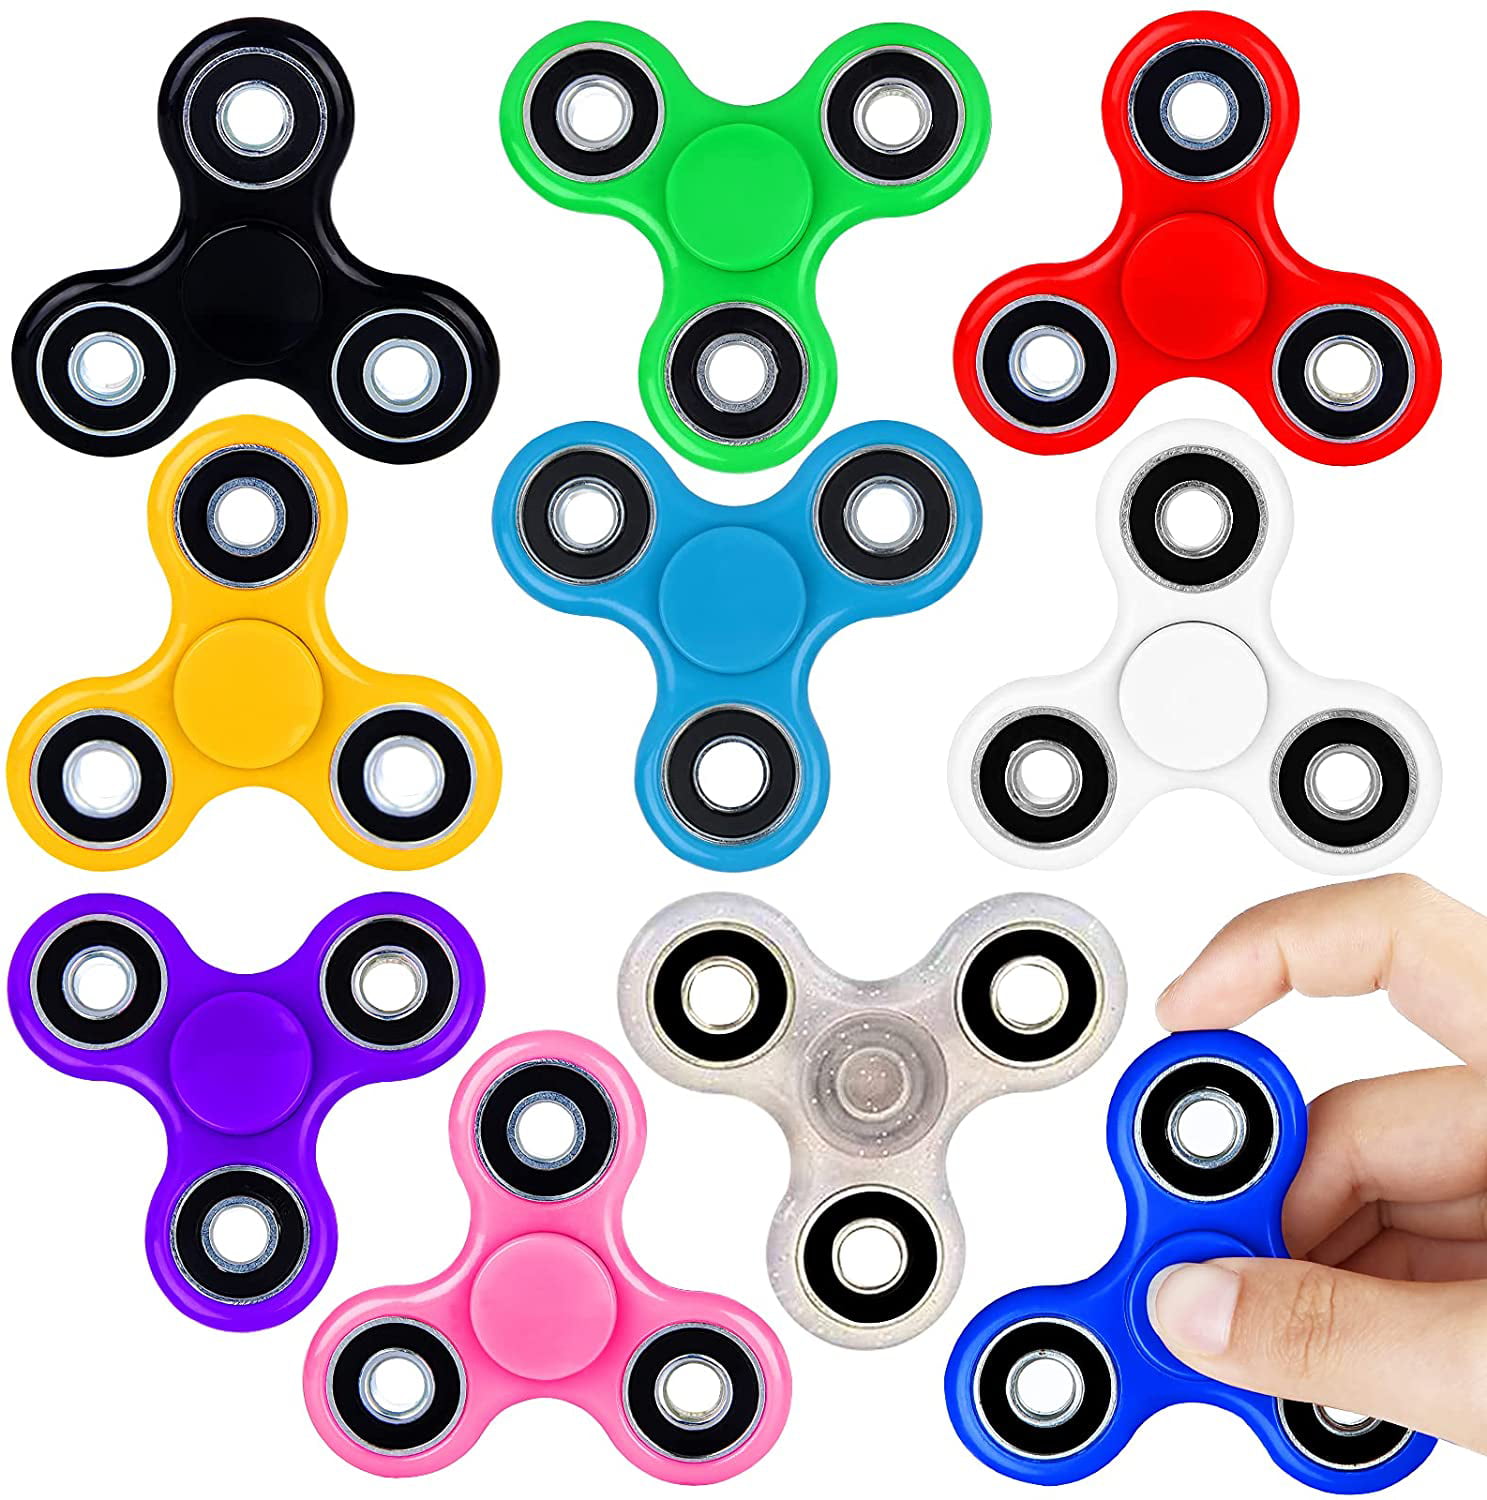 10,000 Pieces Hand Spinner Fidget Steel Gold Toy Finger Gyro Spinners 